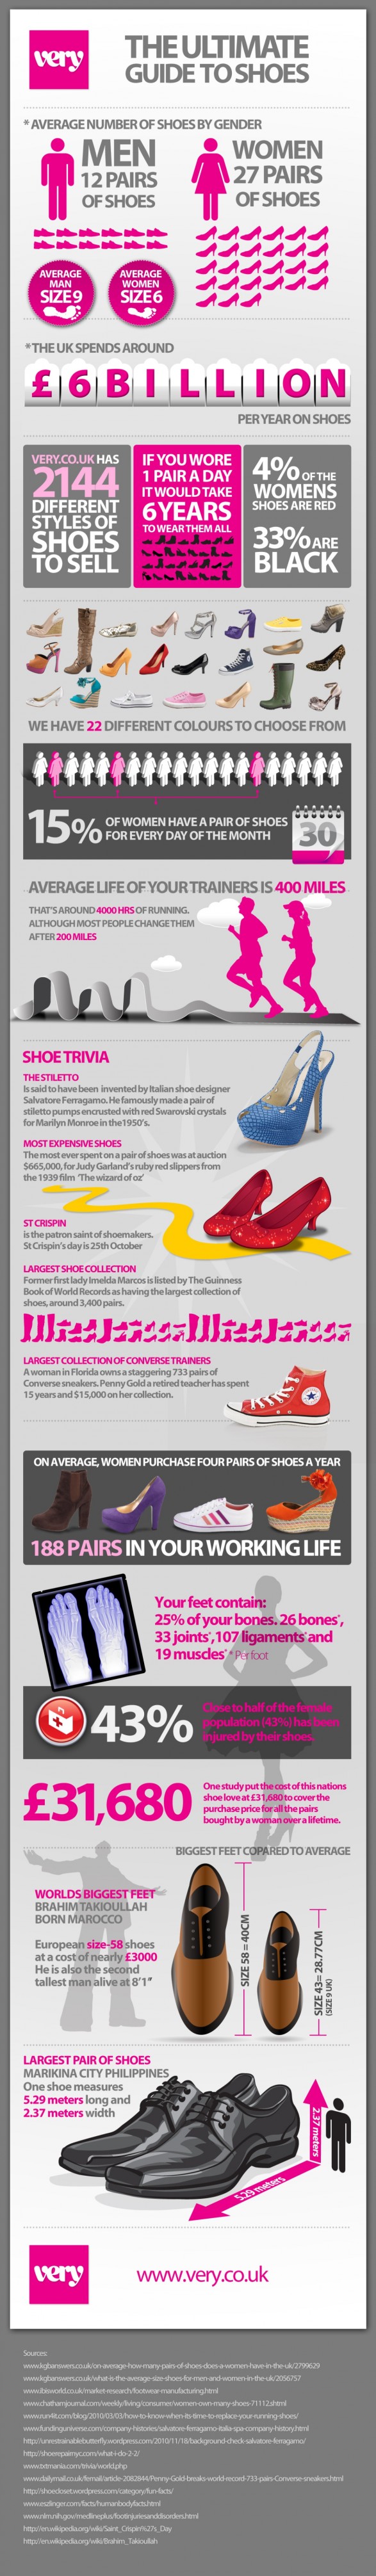 Interesting Facts About Shoes